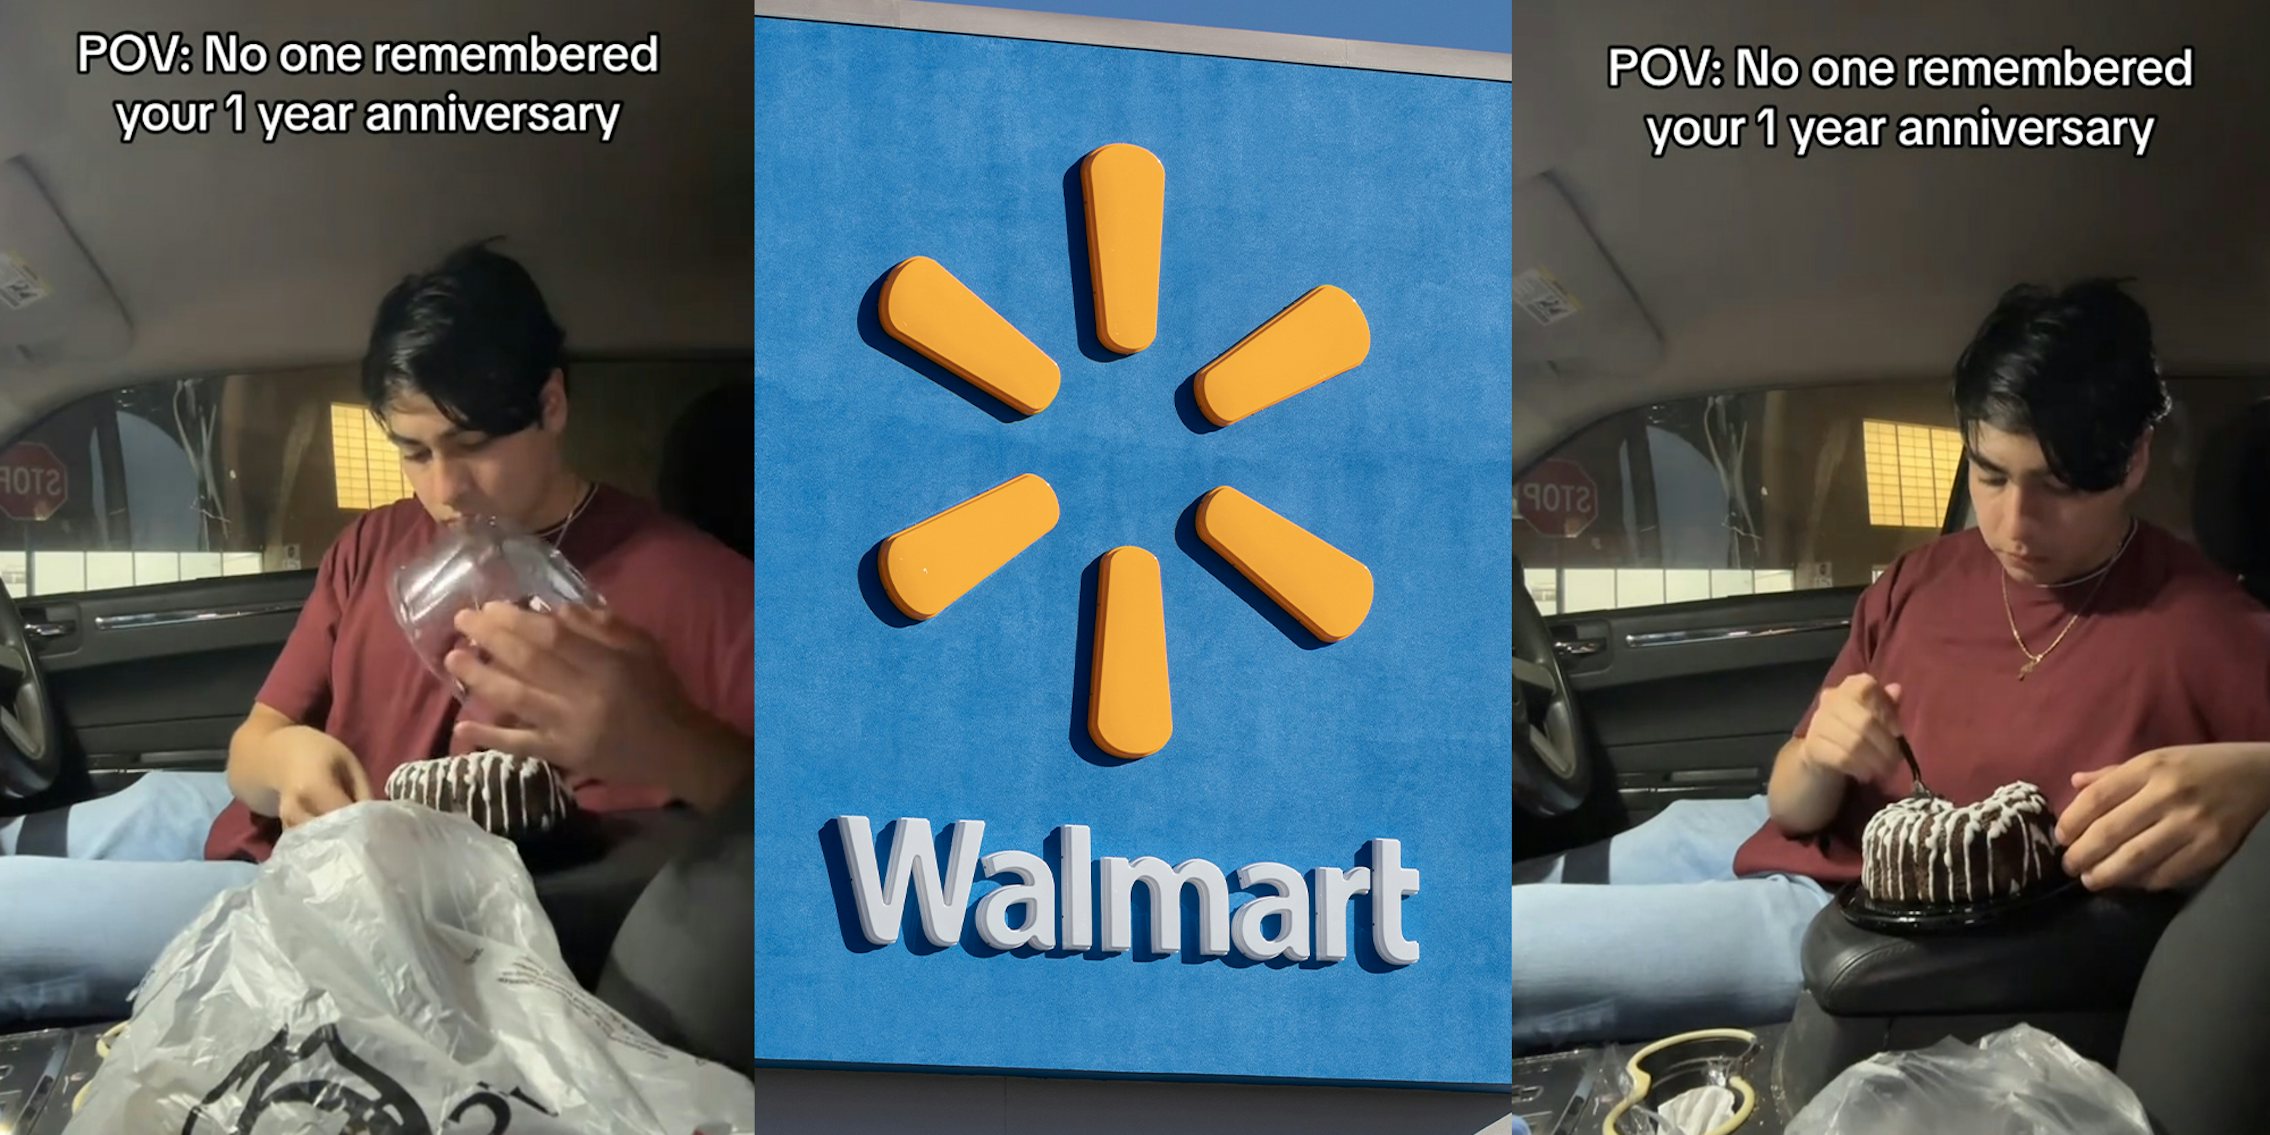 Walmart worker eats cake alone in car on 1-year anniversary because 'no one remembered'